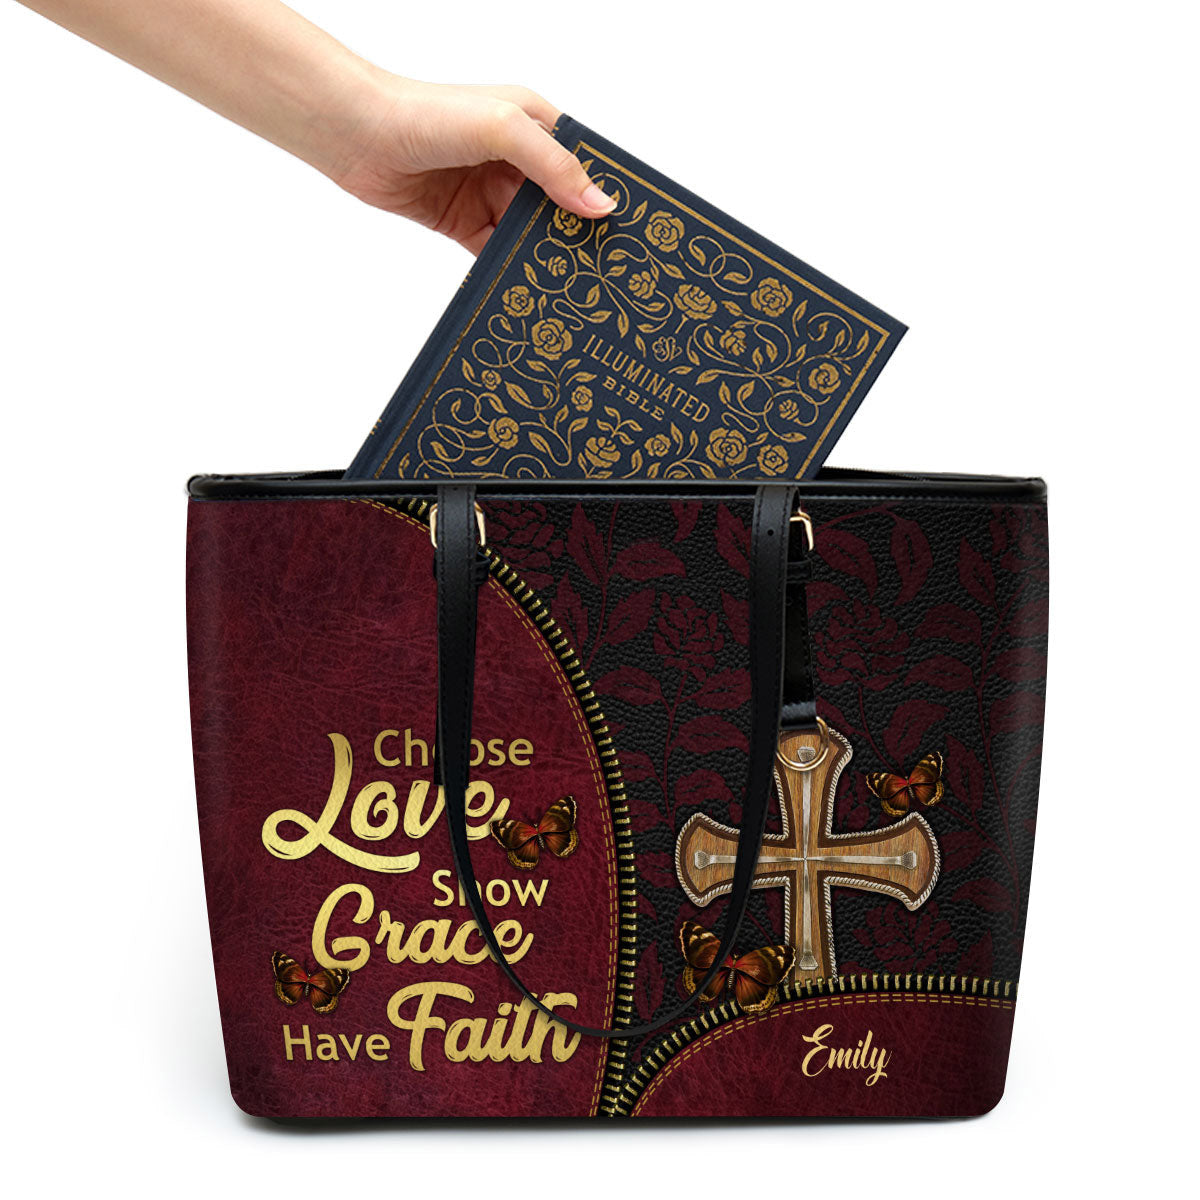 Choose Love Show Grace Have Faith Personalized Large Leather Tote Bag - Christian Gifts For Women